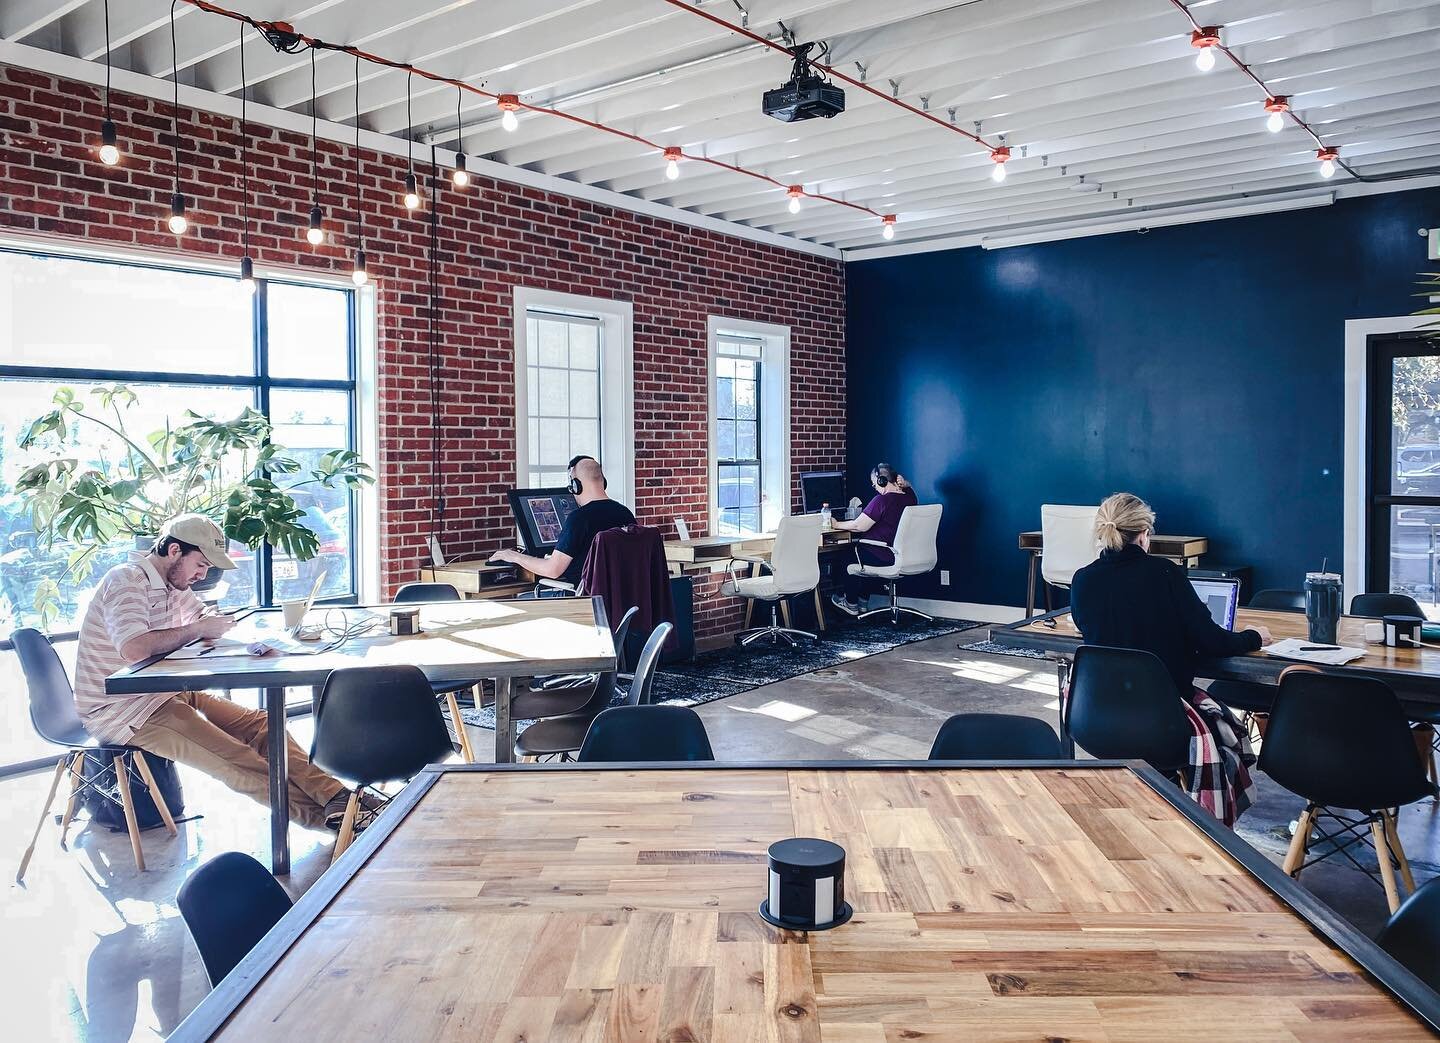 Looking for a workplace to love in the new year?  The Hub offers Community Work, Desk Work, and Private Office Memberships to help you get out of your house and into your best work groove. Book a tour today via the link in our bio!